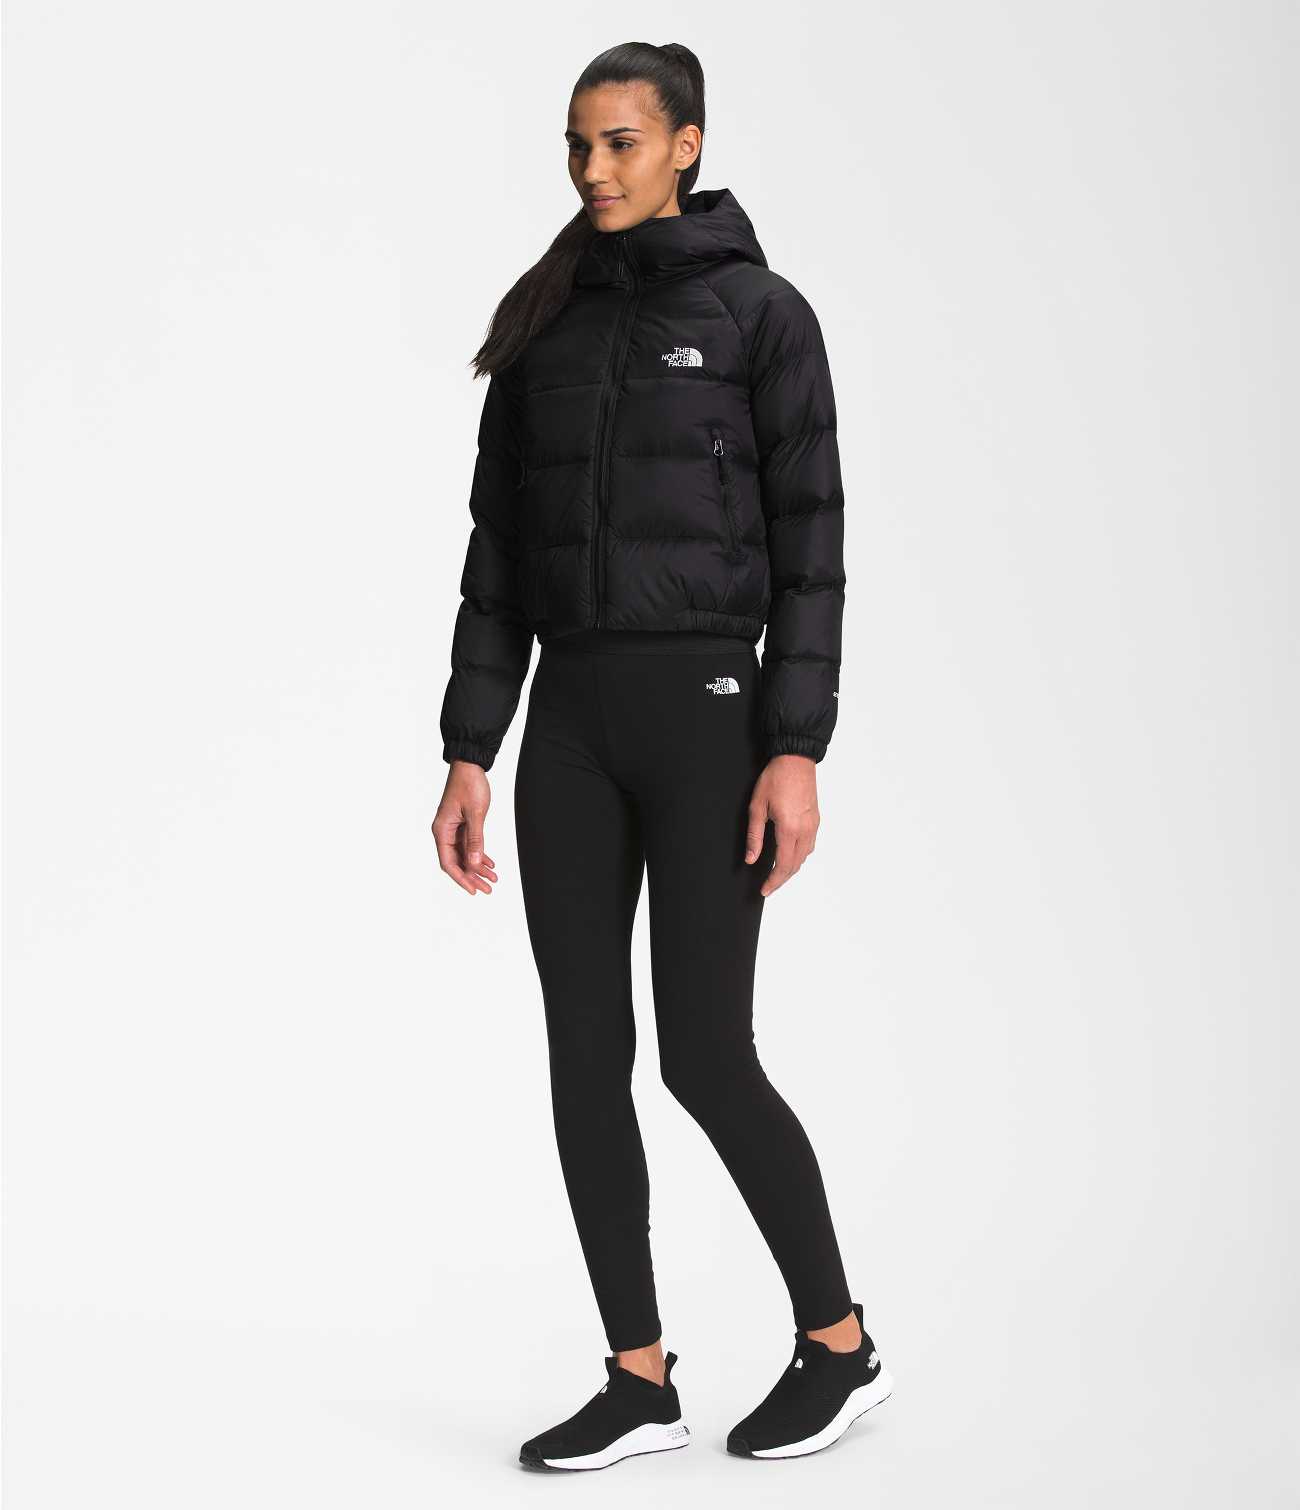 The North Face Women's Hydrenalite™ Down Vest